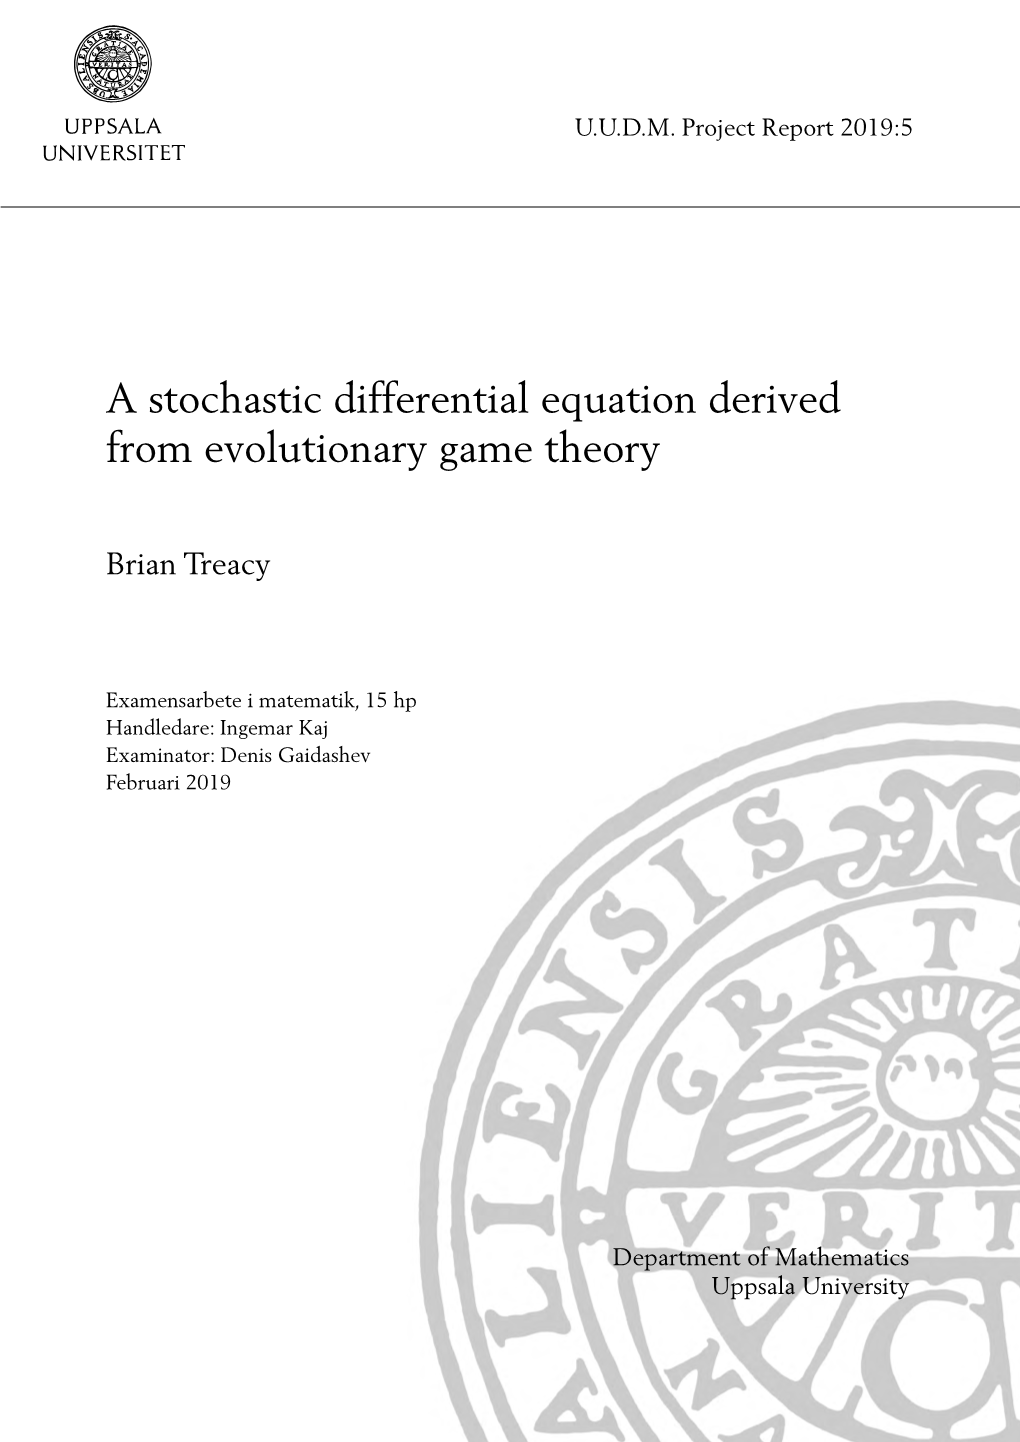 A Stochastic Differential Equation Derived from Evolutionary Game Theory